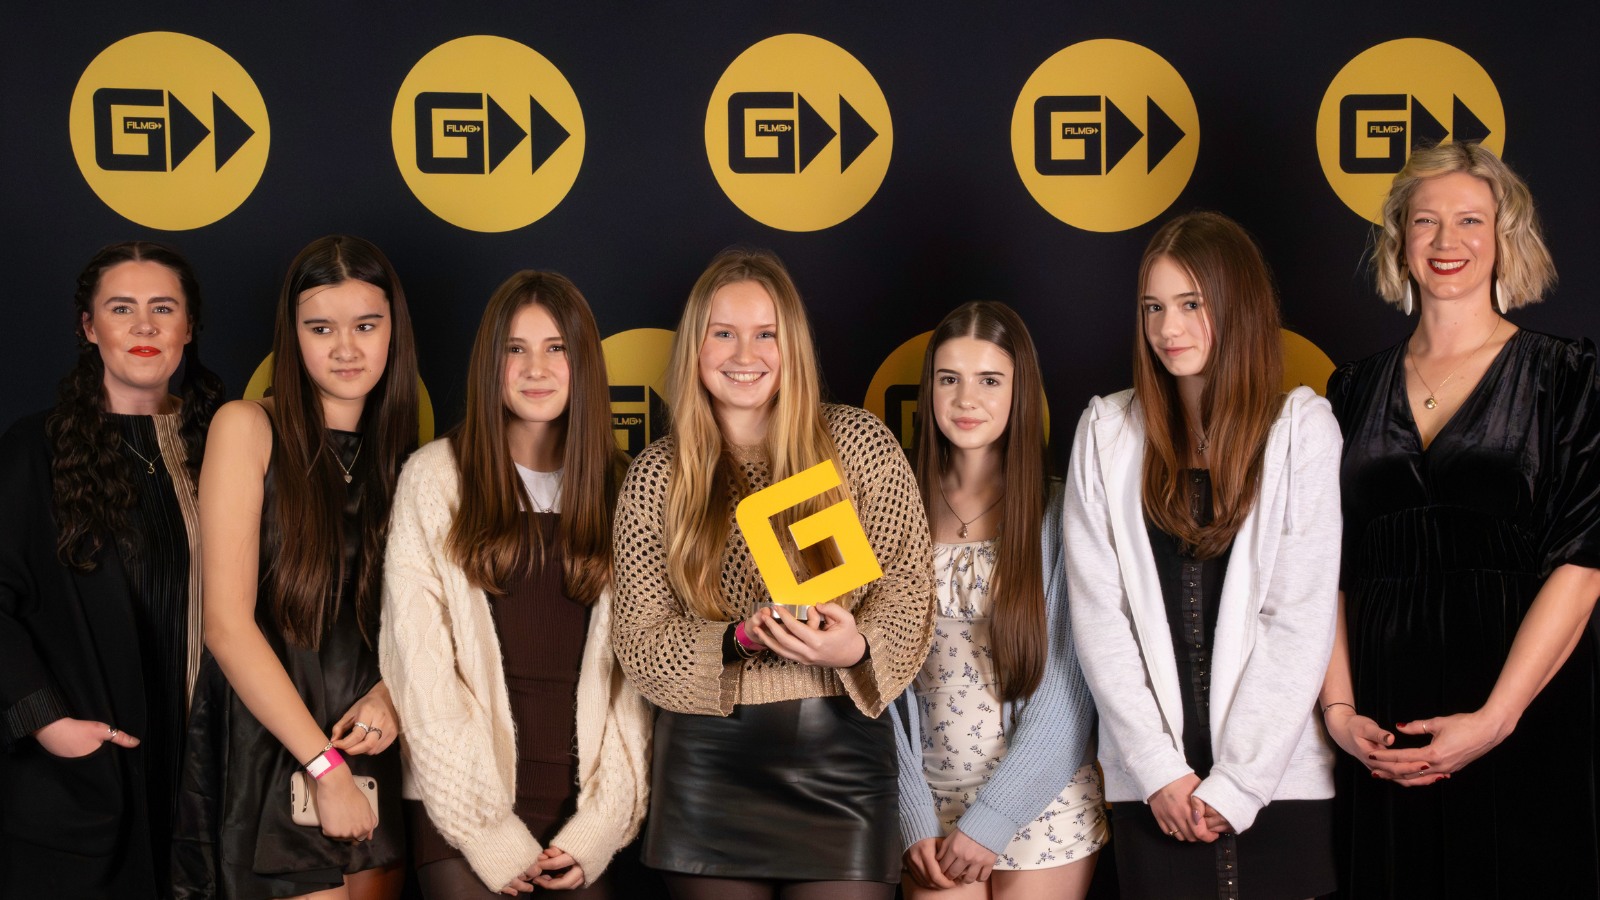 A group of girls and women stand in a line, with the person in the middle holding a trophy in the shape of the letter G